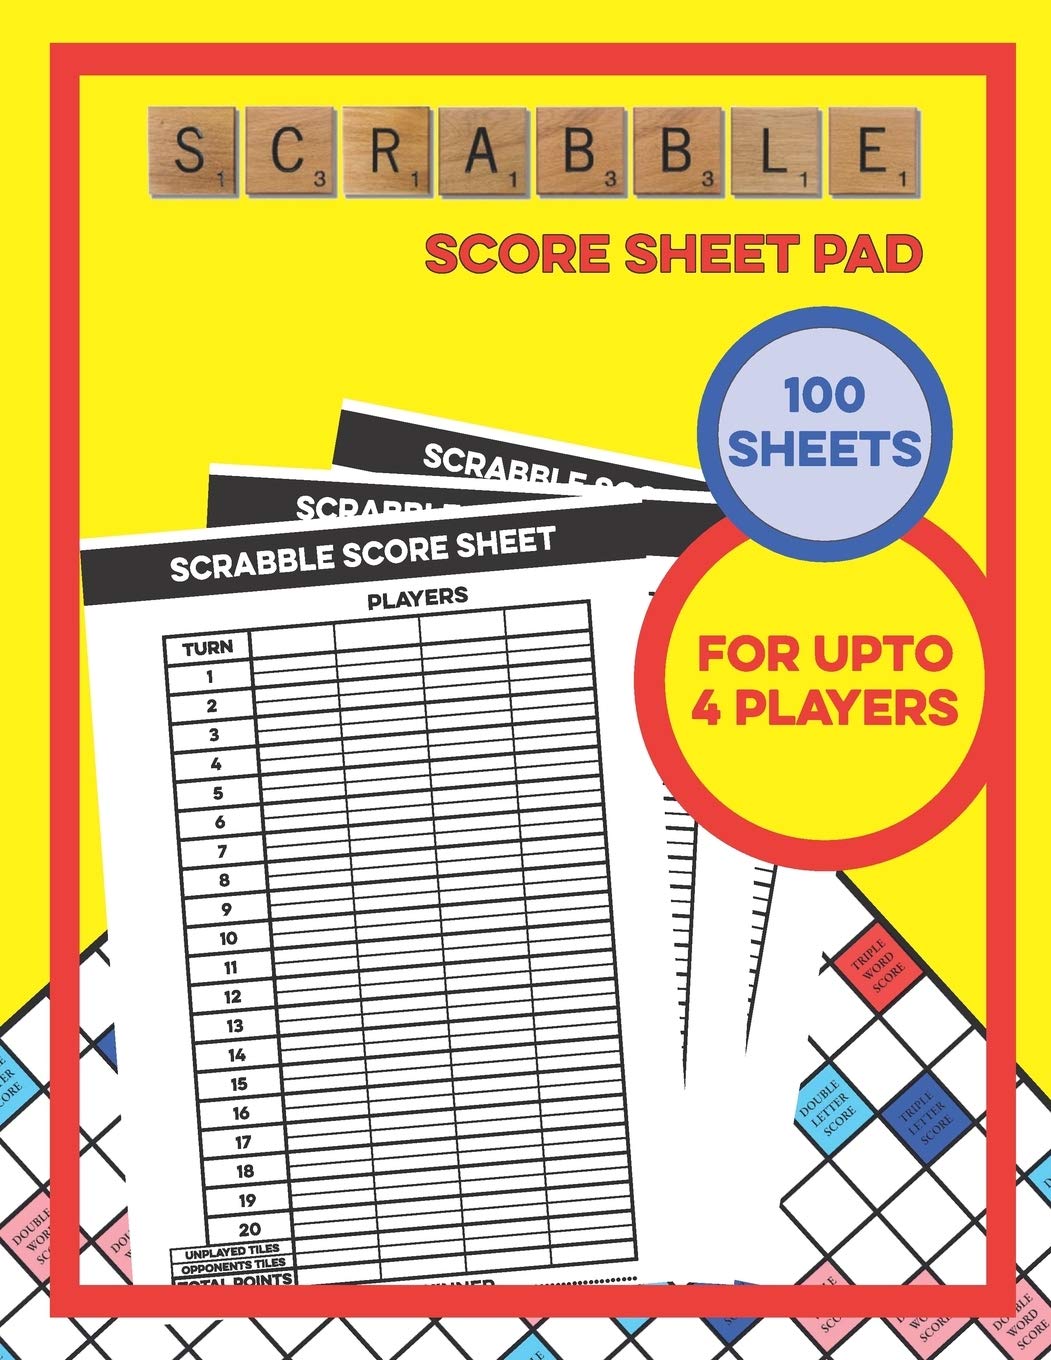 Book Cover Scrabble Score Sheet Pad - 100 Sheets - For Upto 4 Players: 100 Score Sheets & 1 Player Scoreboard